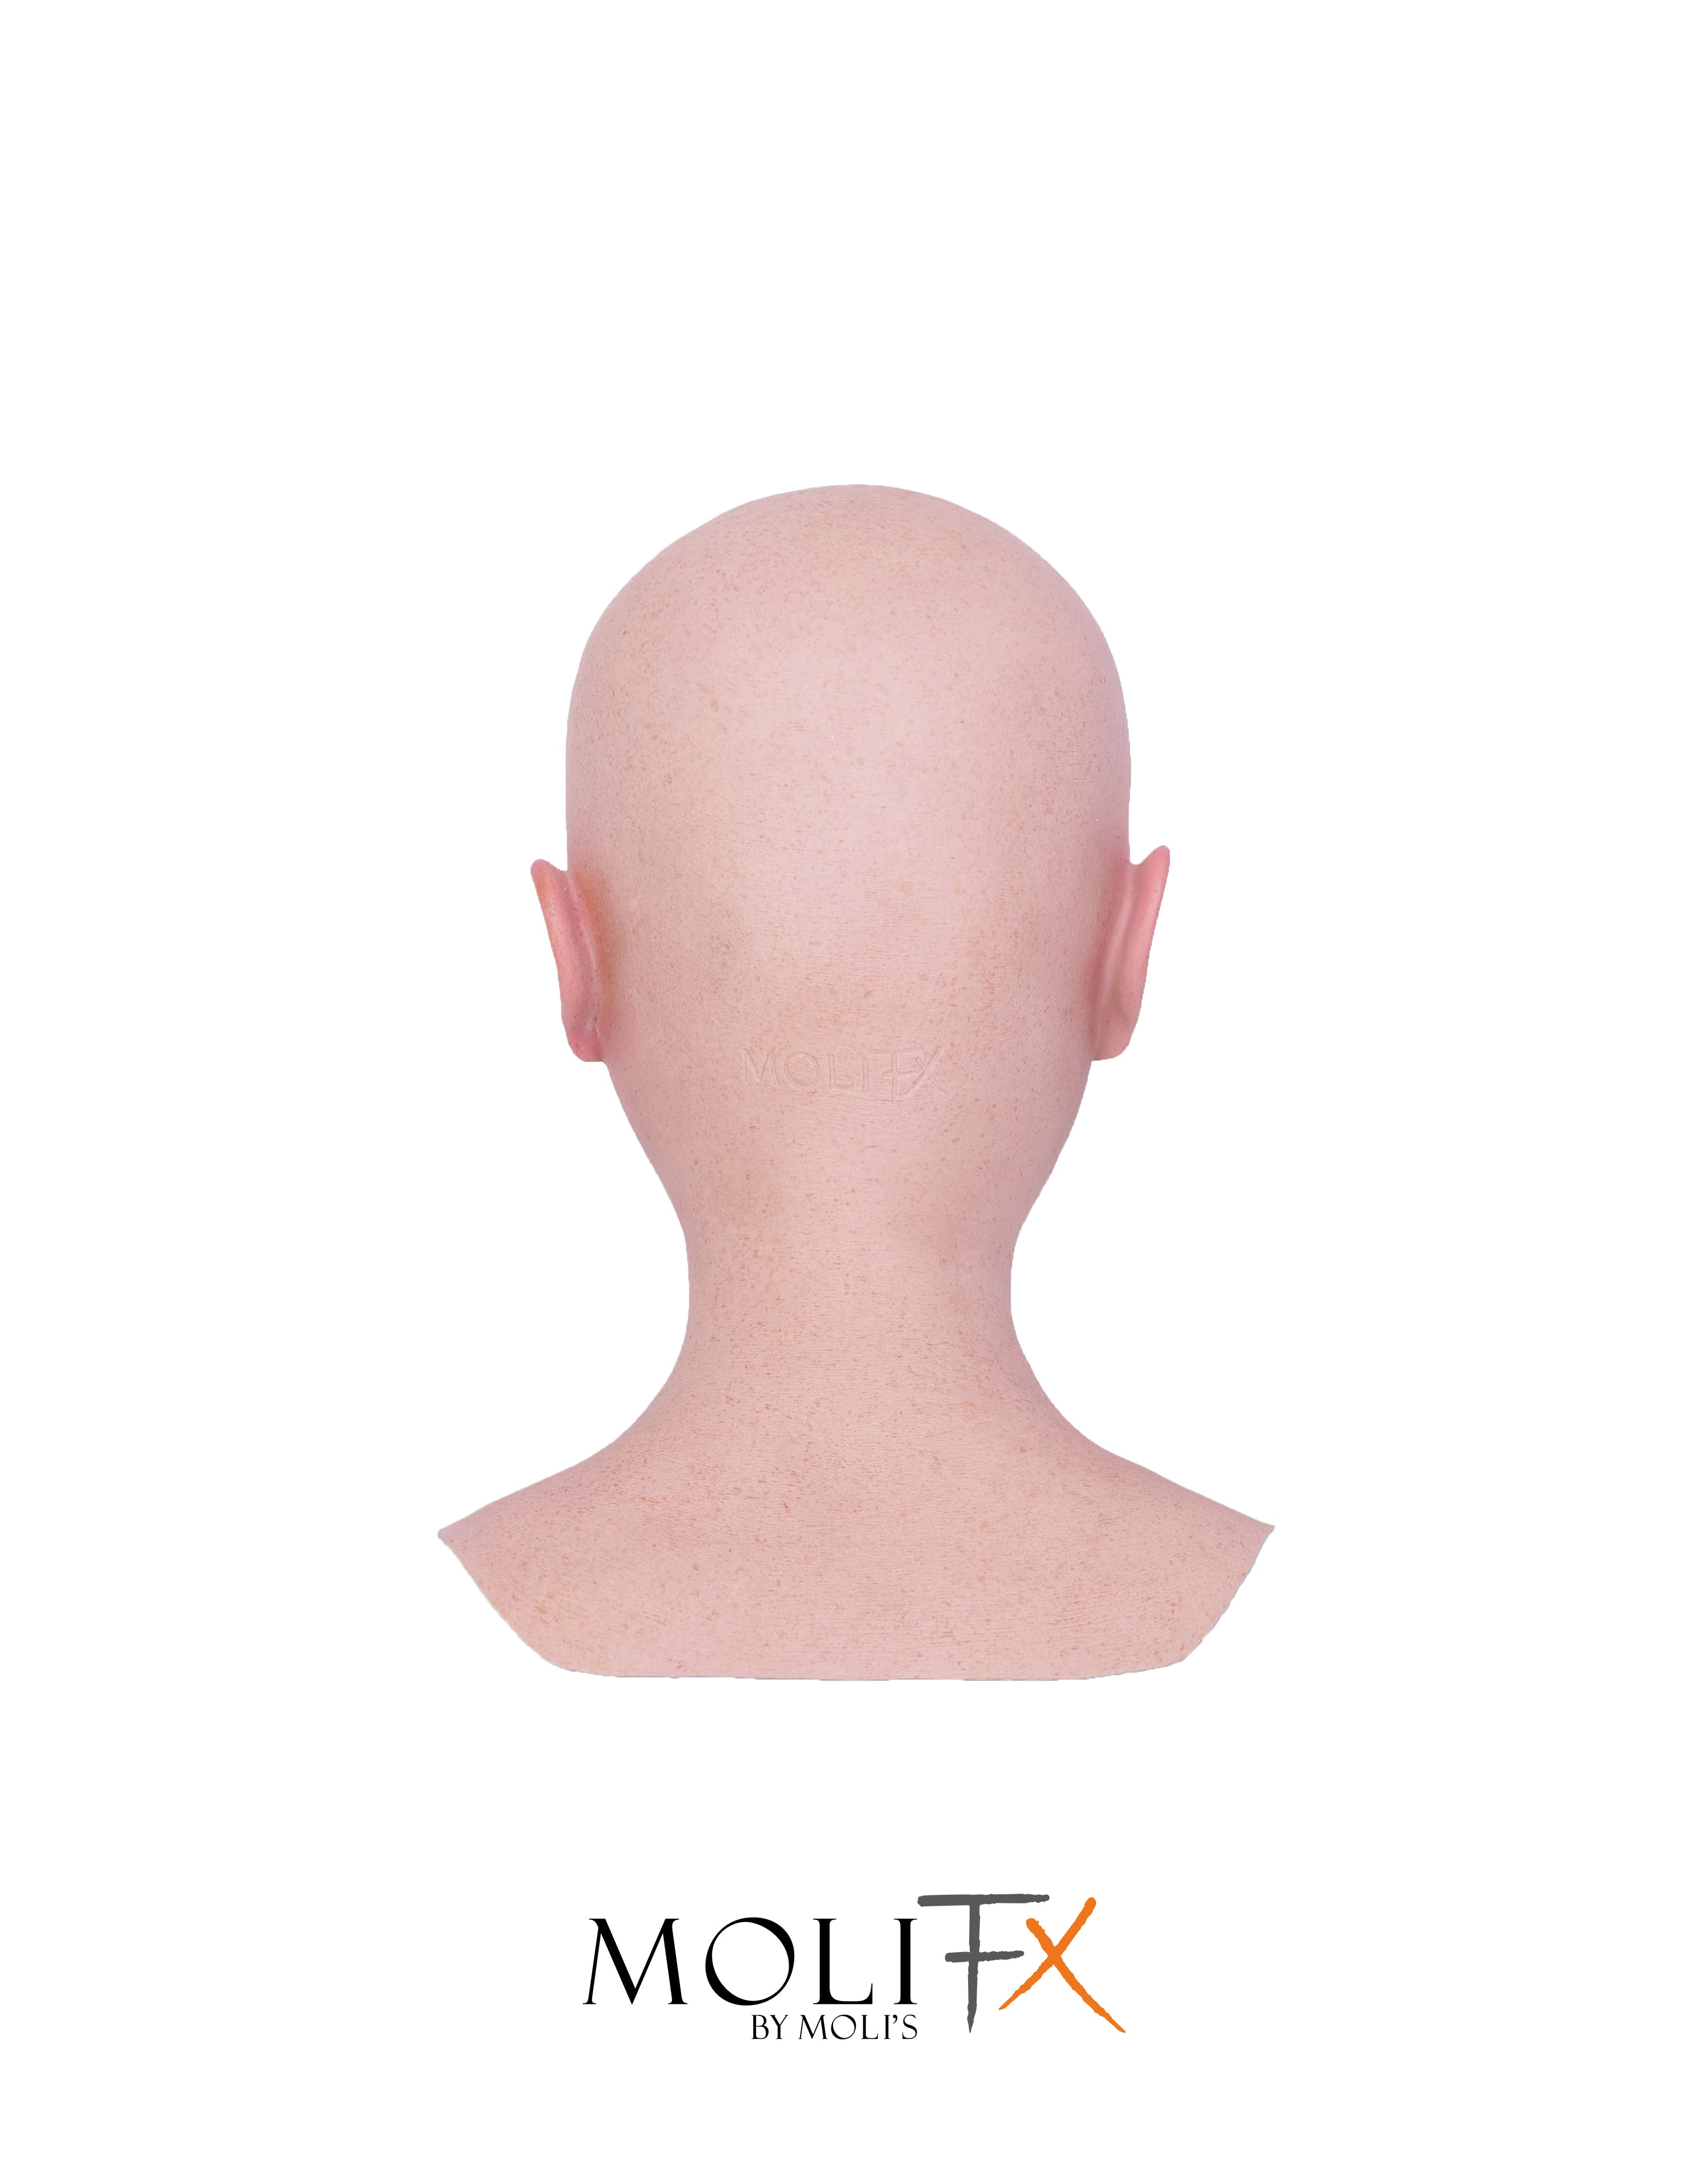 MoliFX | Molly S “Xmas Limited” Makeup Style Silicone Female Mask SFX Class X02S